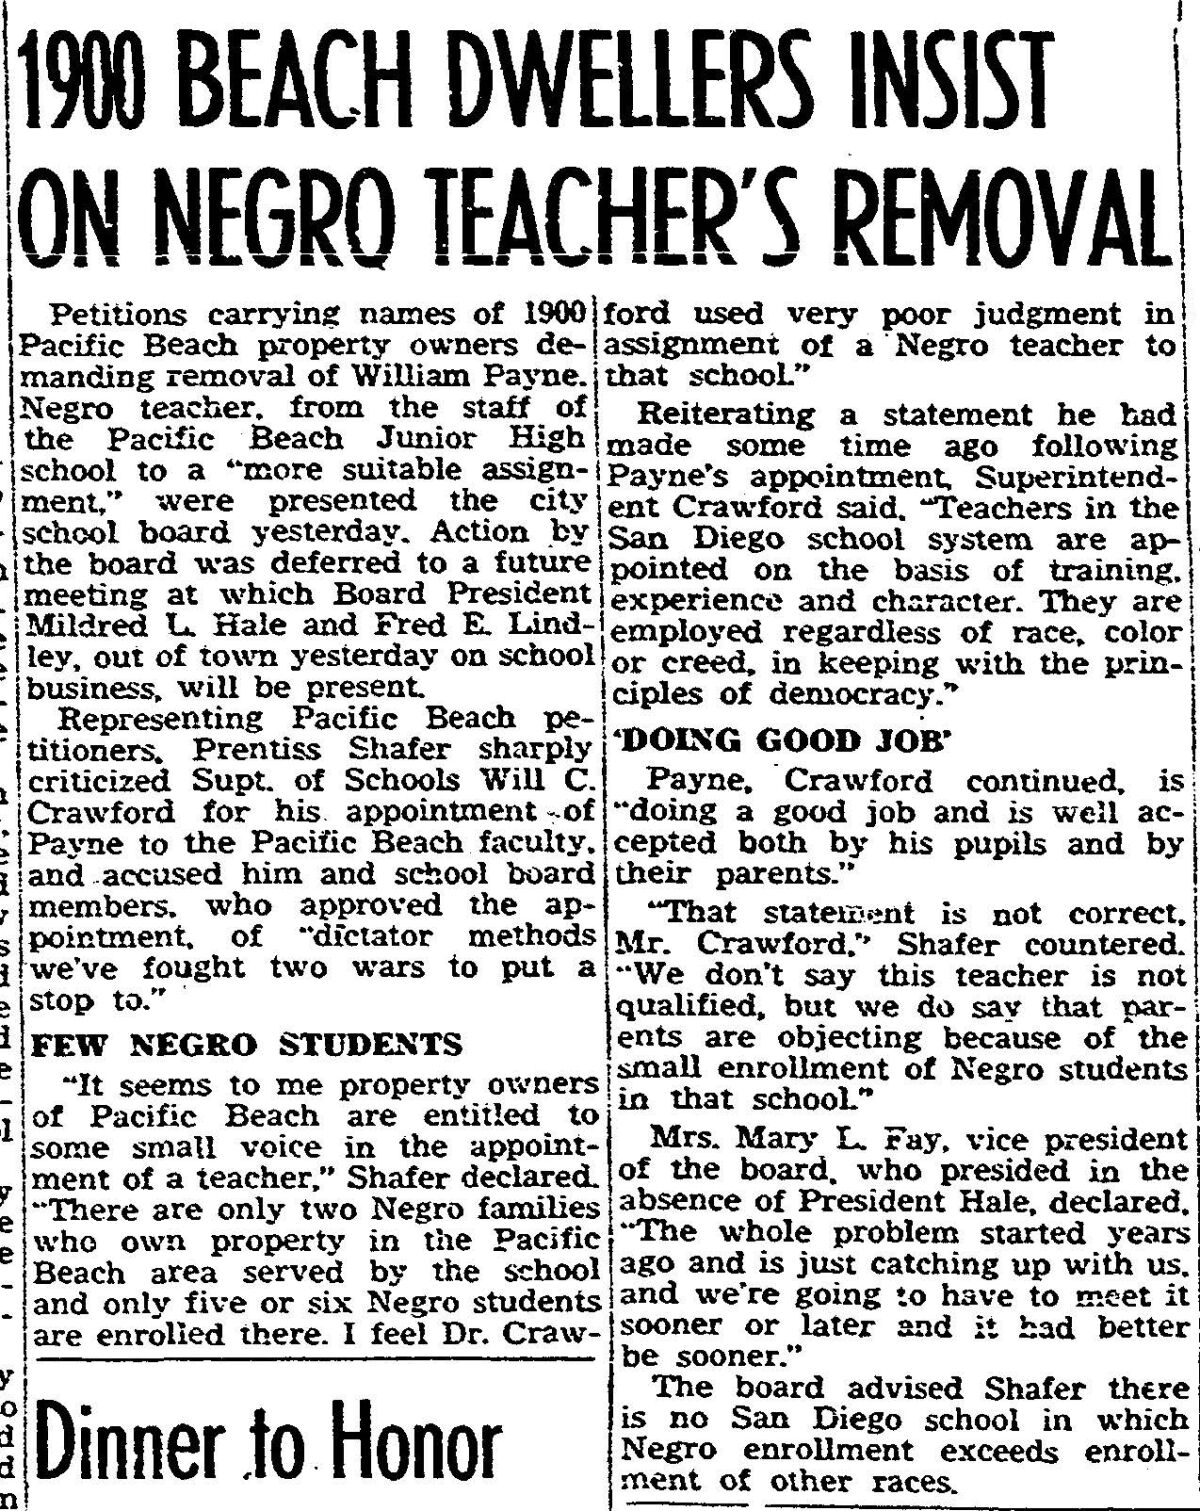 San Diego Union headlines on controversy over hiring  William Payne, a Black teacher, in 1945